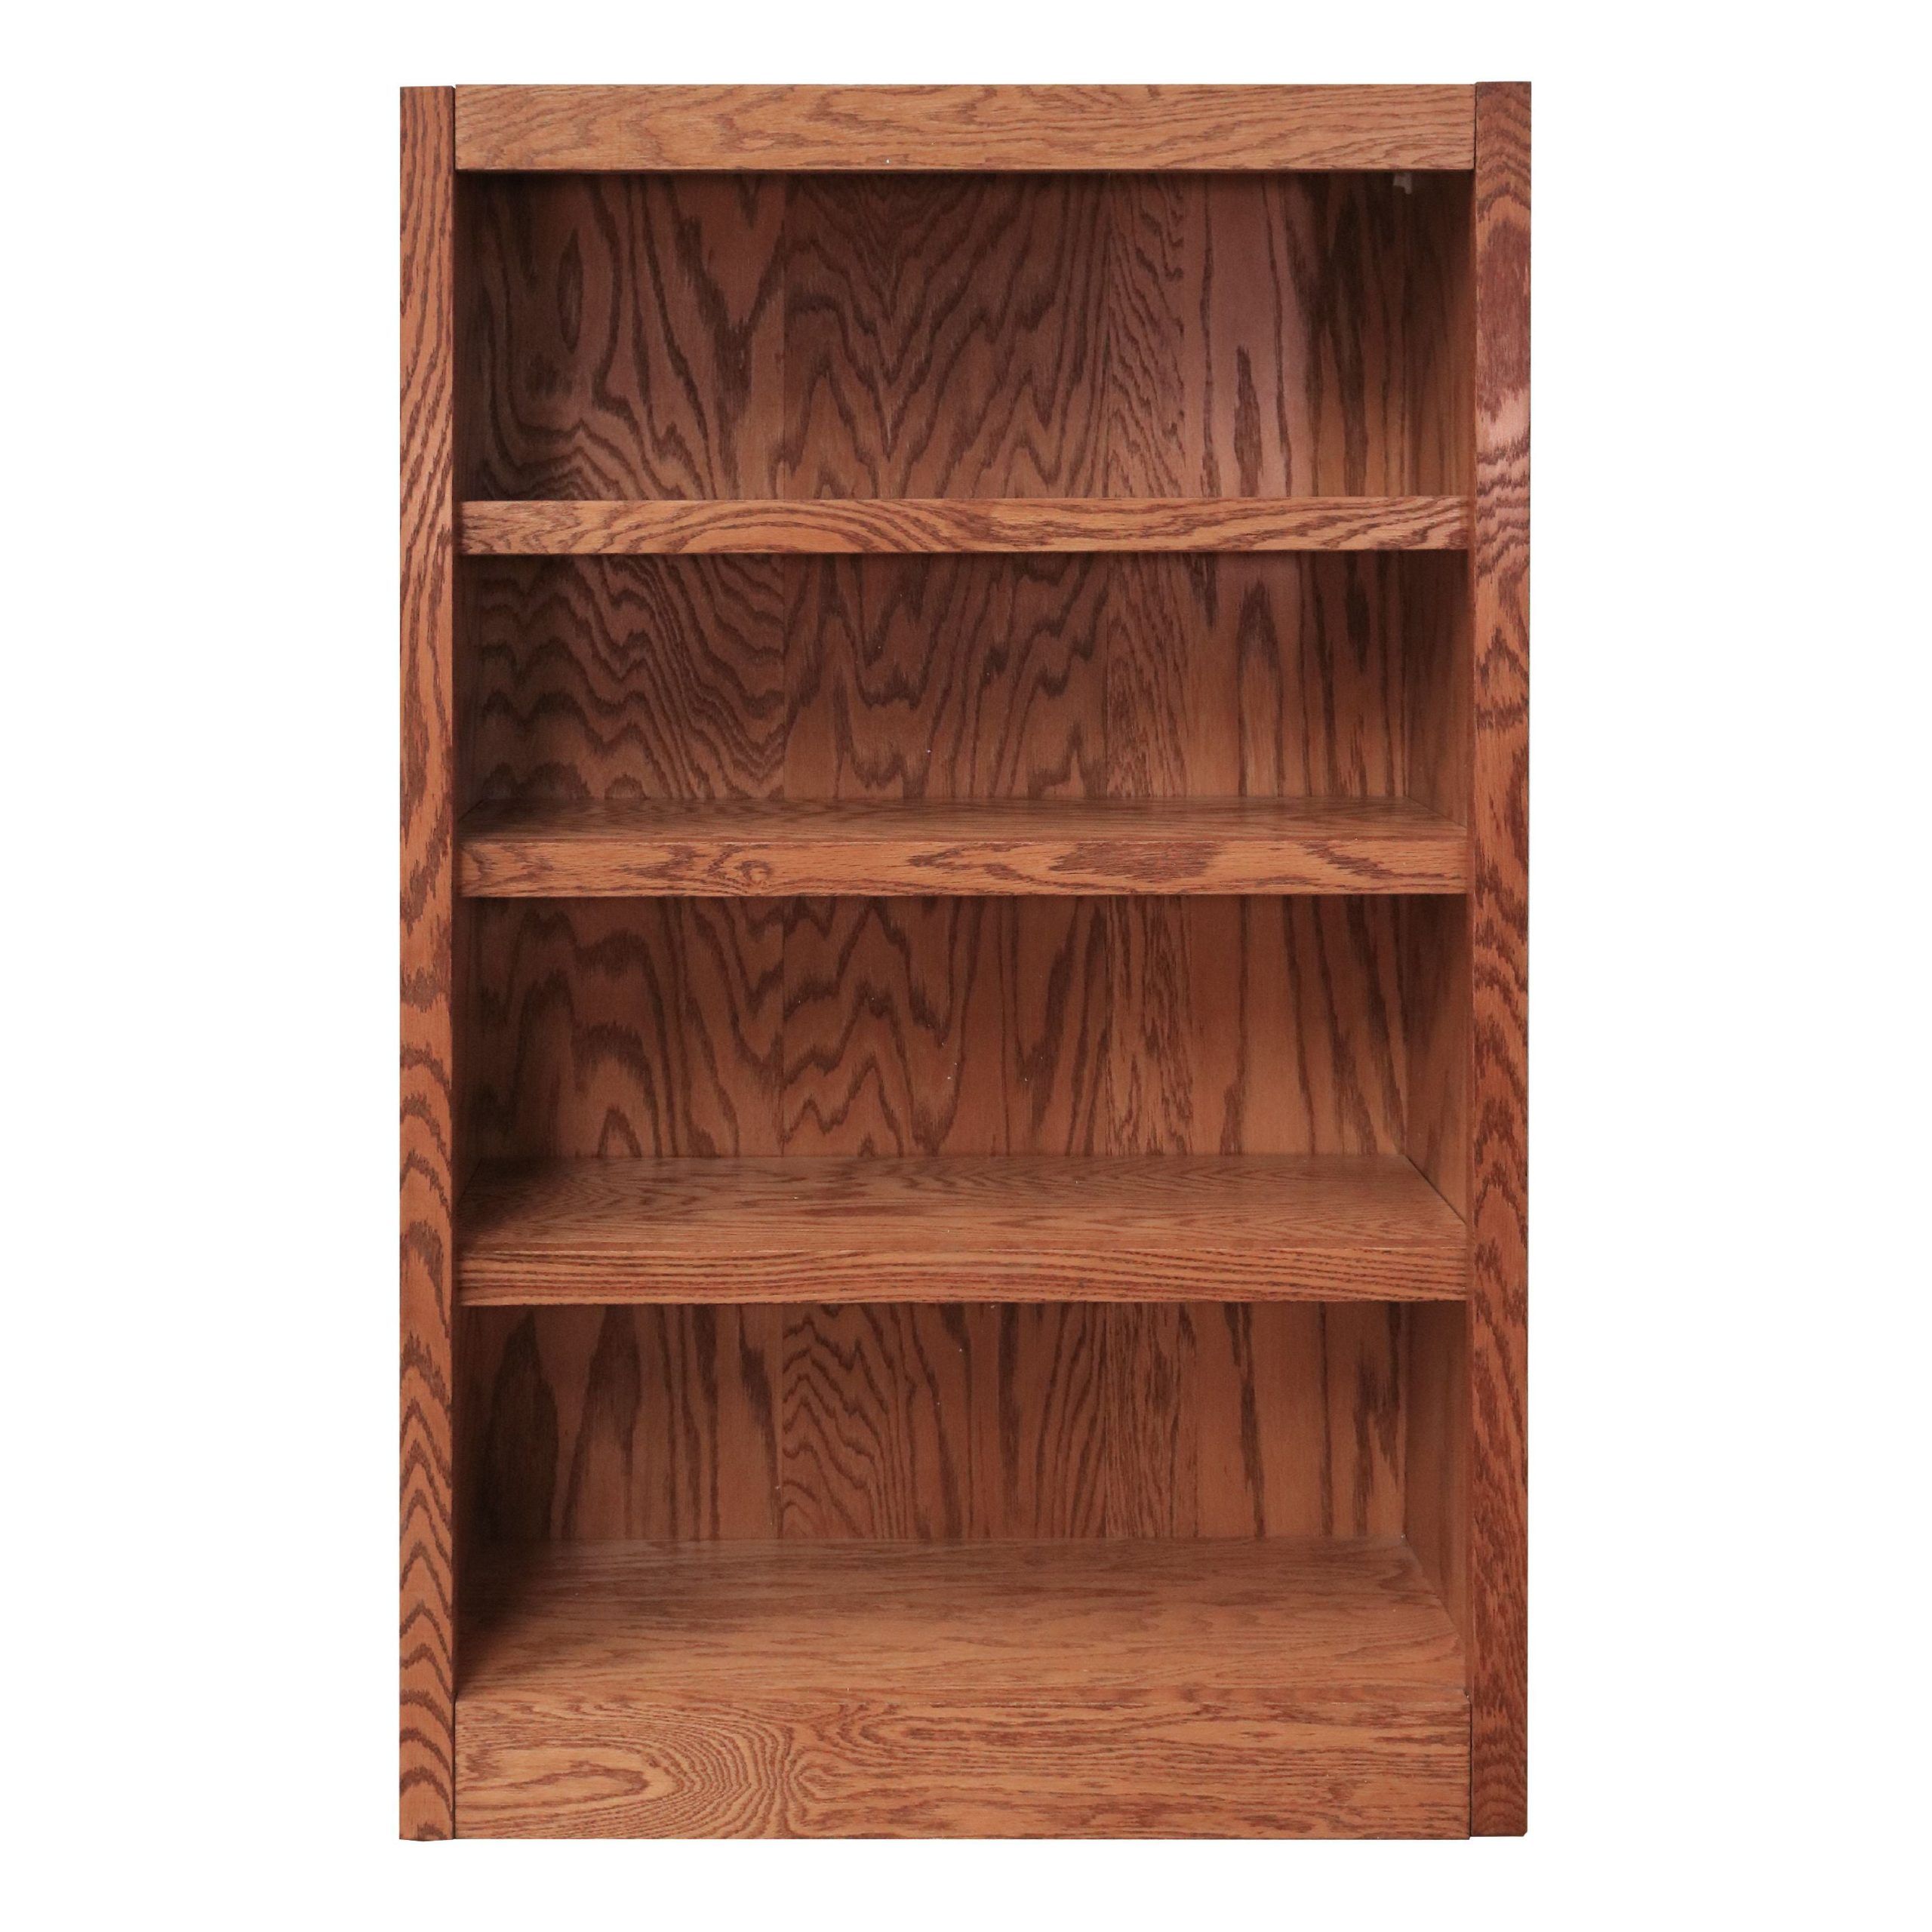 Concepts In Wood 4 Shelf Wood Bookcase, 48 Inch Tall – Oak Finish –  Walmart Inside 48 Inch Bookcases (View 15 of 15)